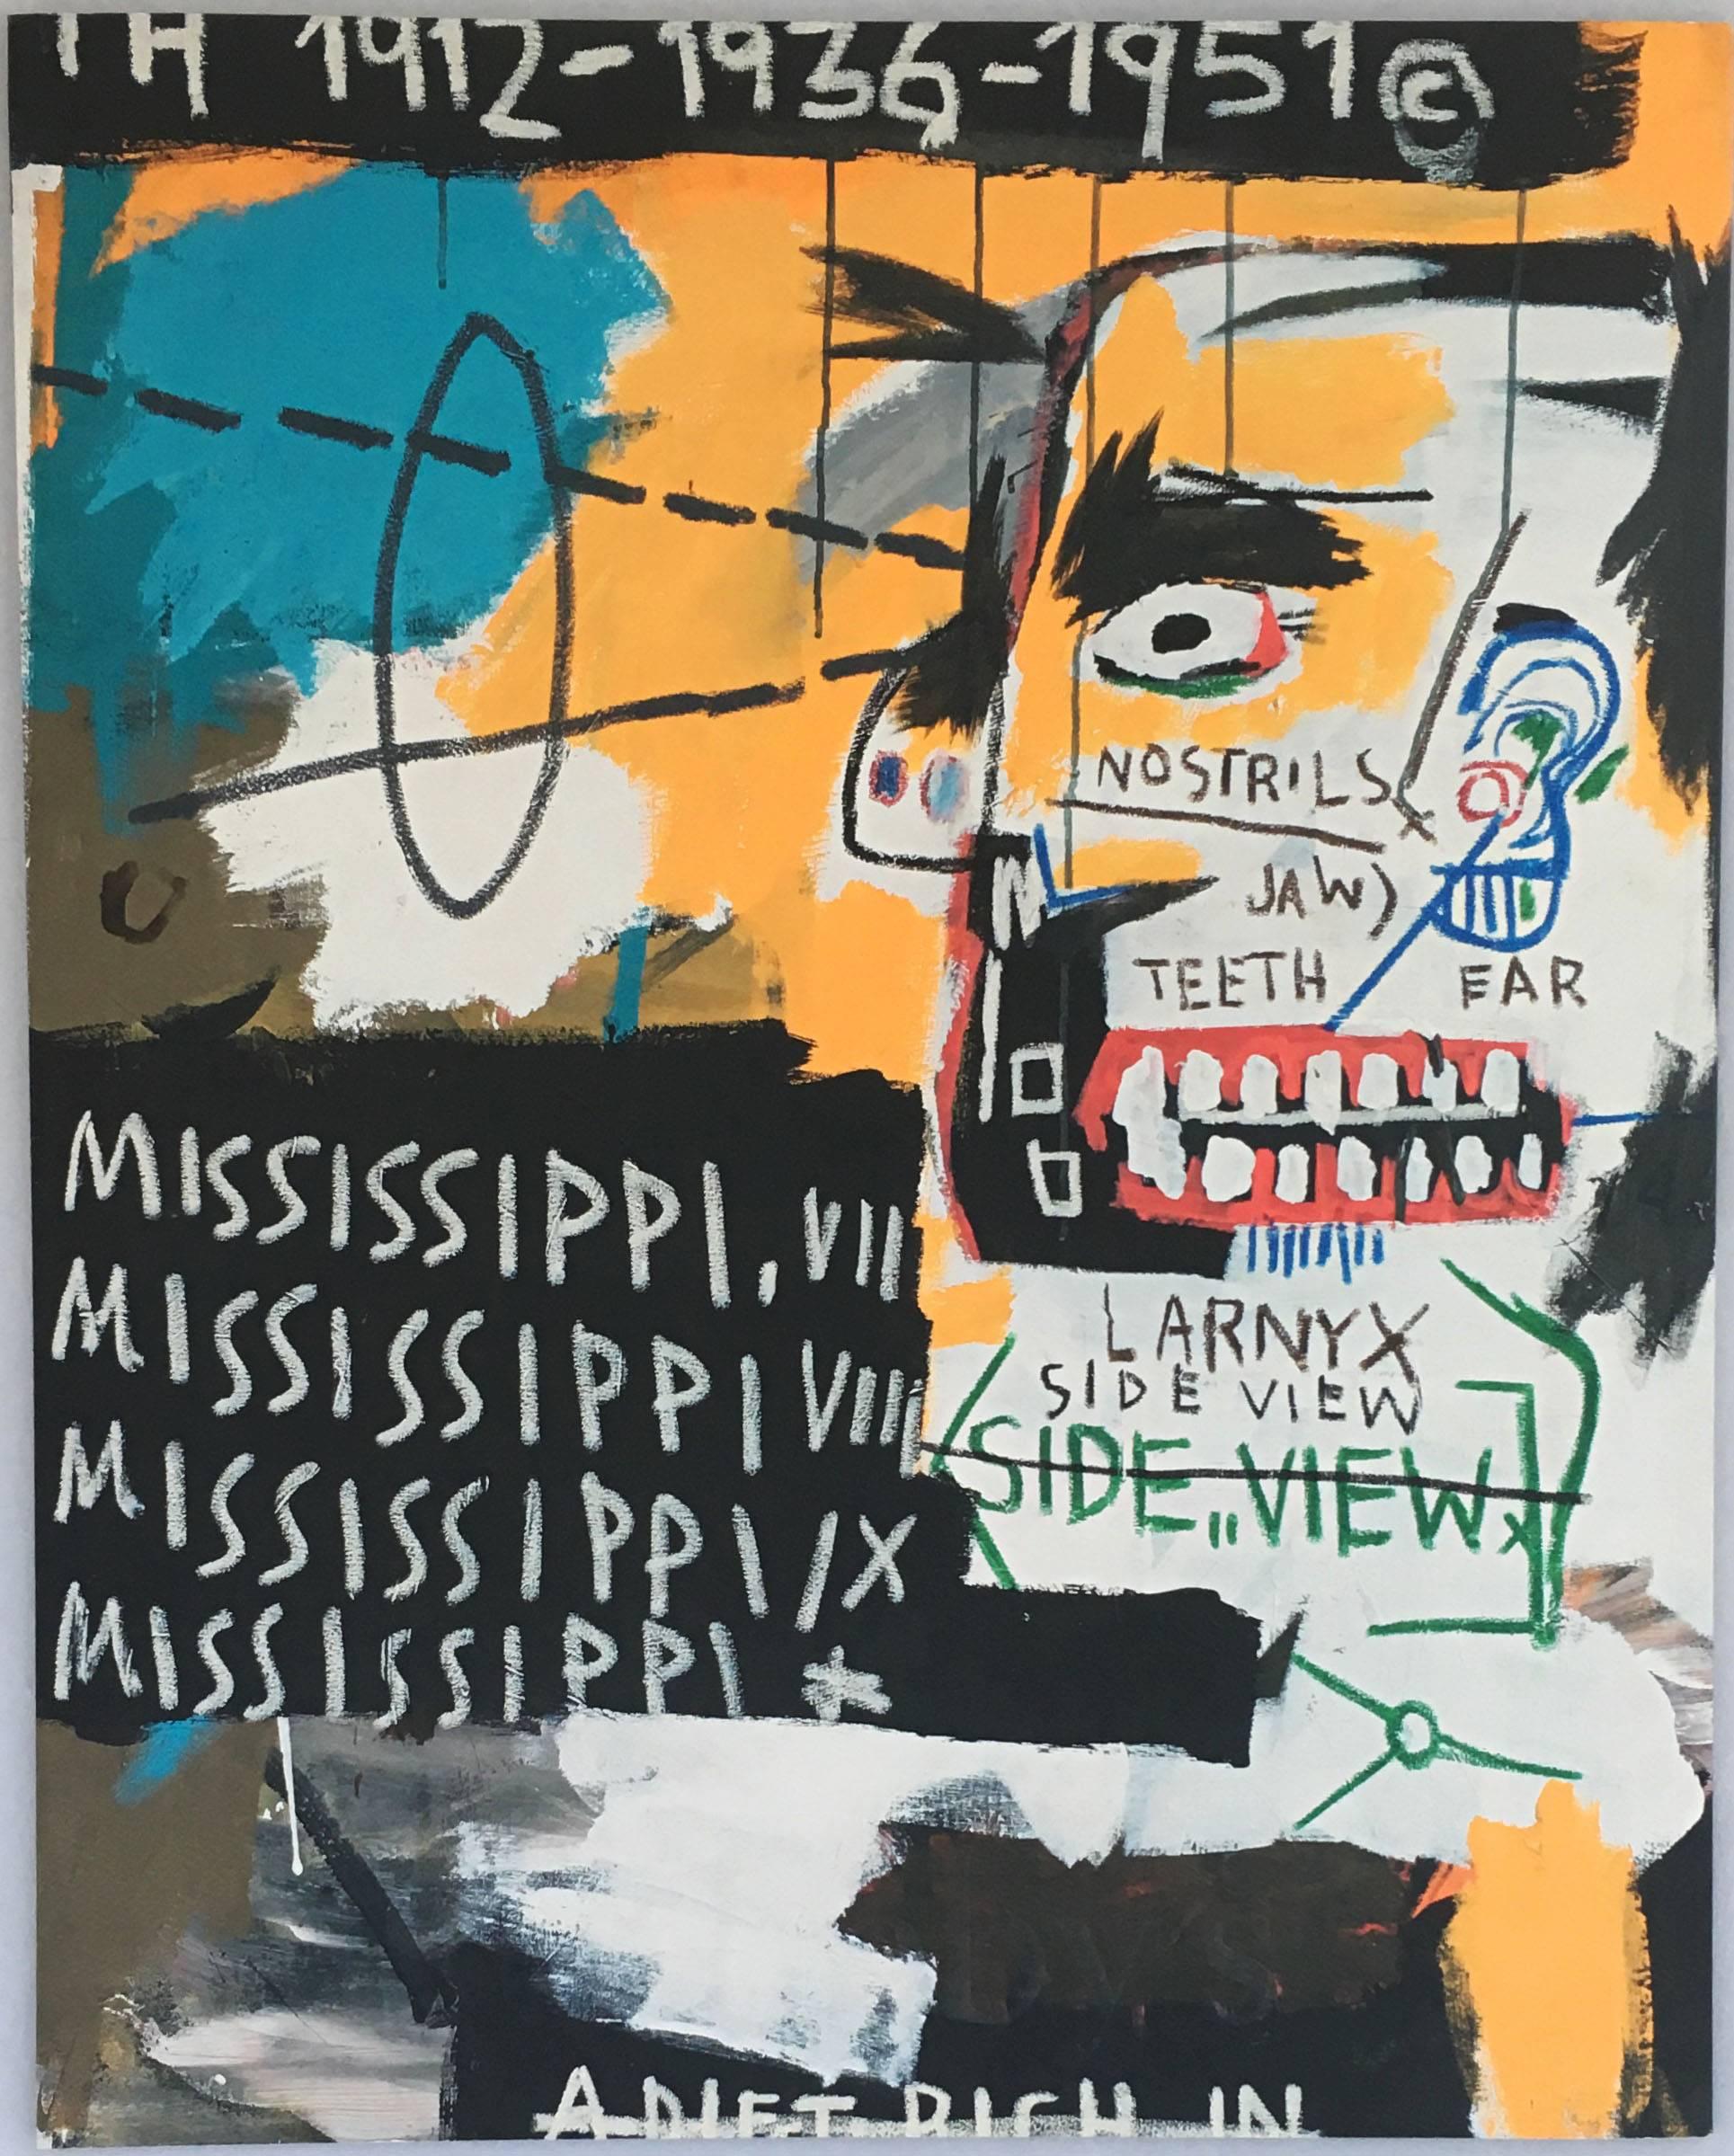 Jean-Michel Basquiat Sotheby's catalog
Produced in-conjunction with the 2014 Sale of Basquiat's 'Undiscovered Genius of the Mississippi Delta. Full catalog devoted to Basquiat and this prized work. Contains a number of early photos of the artist